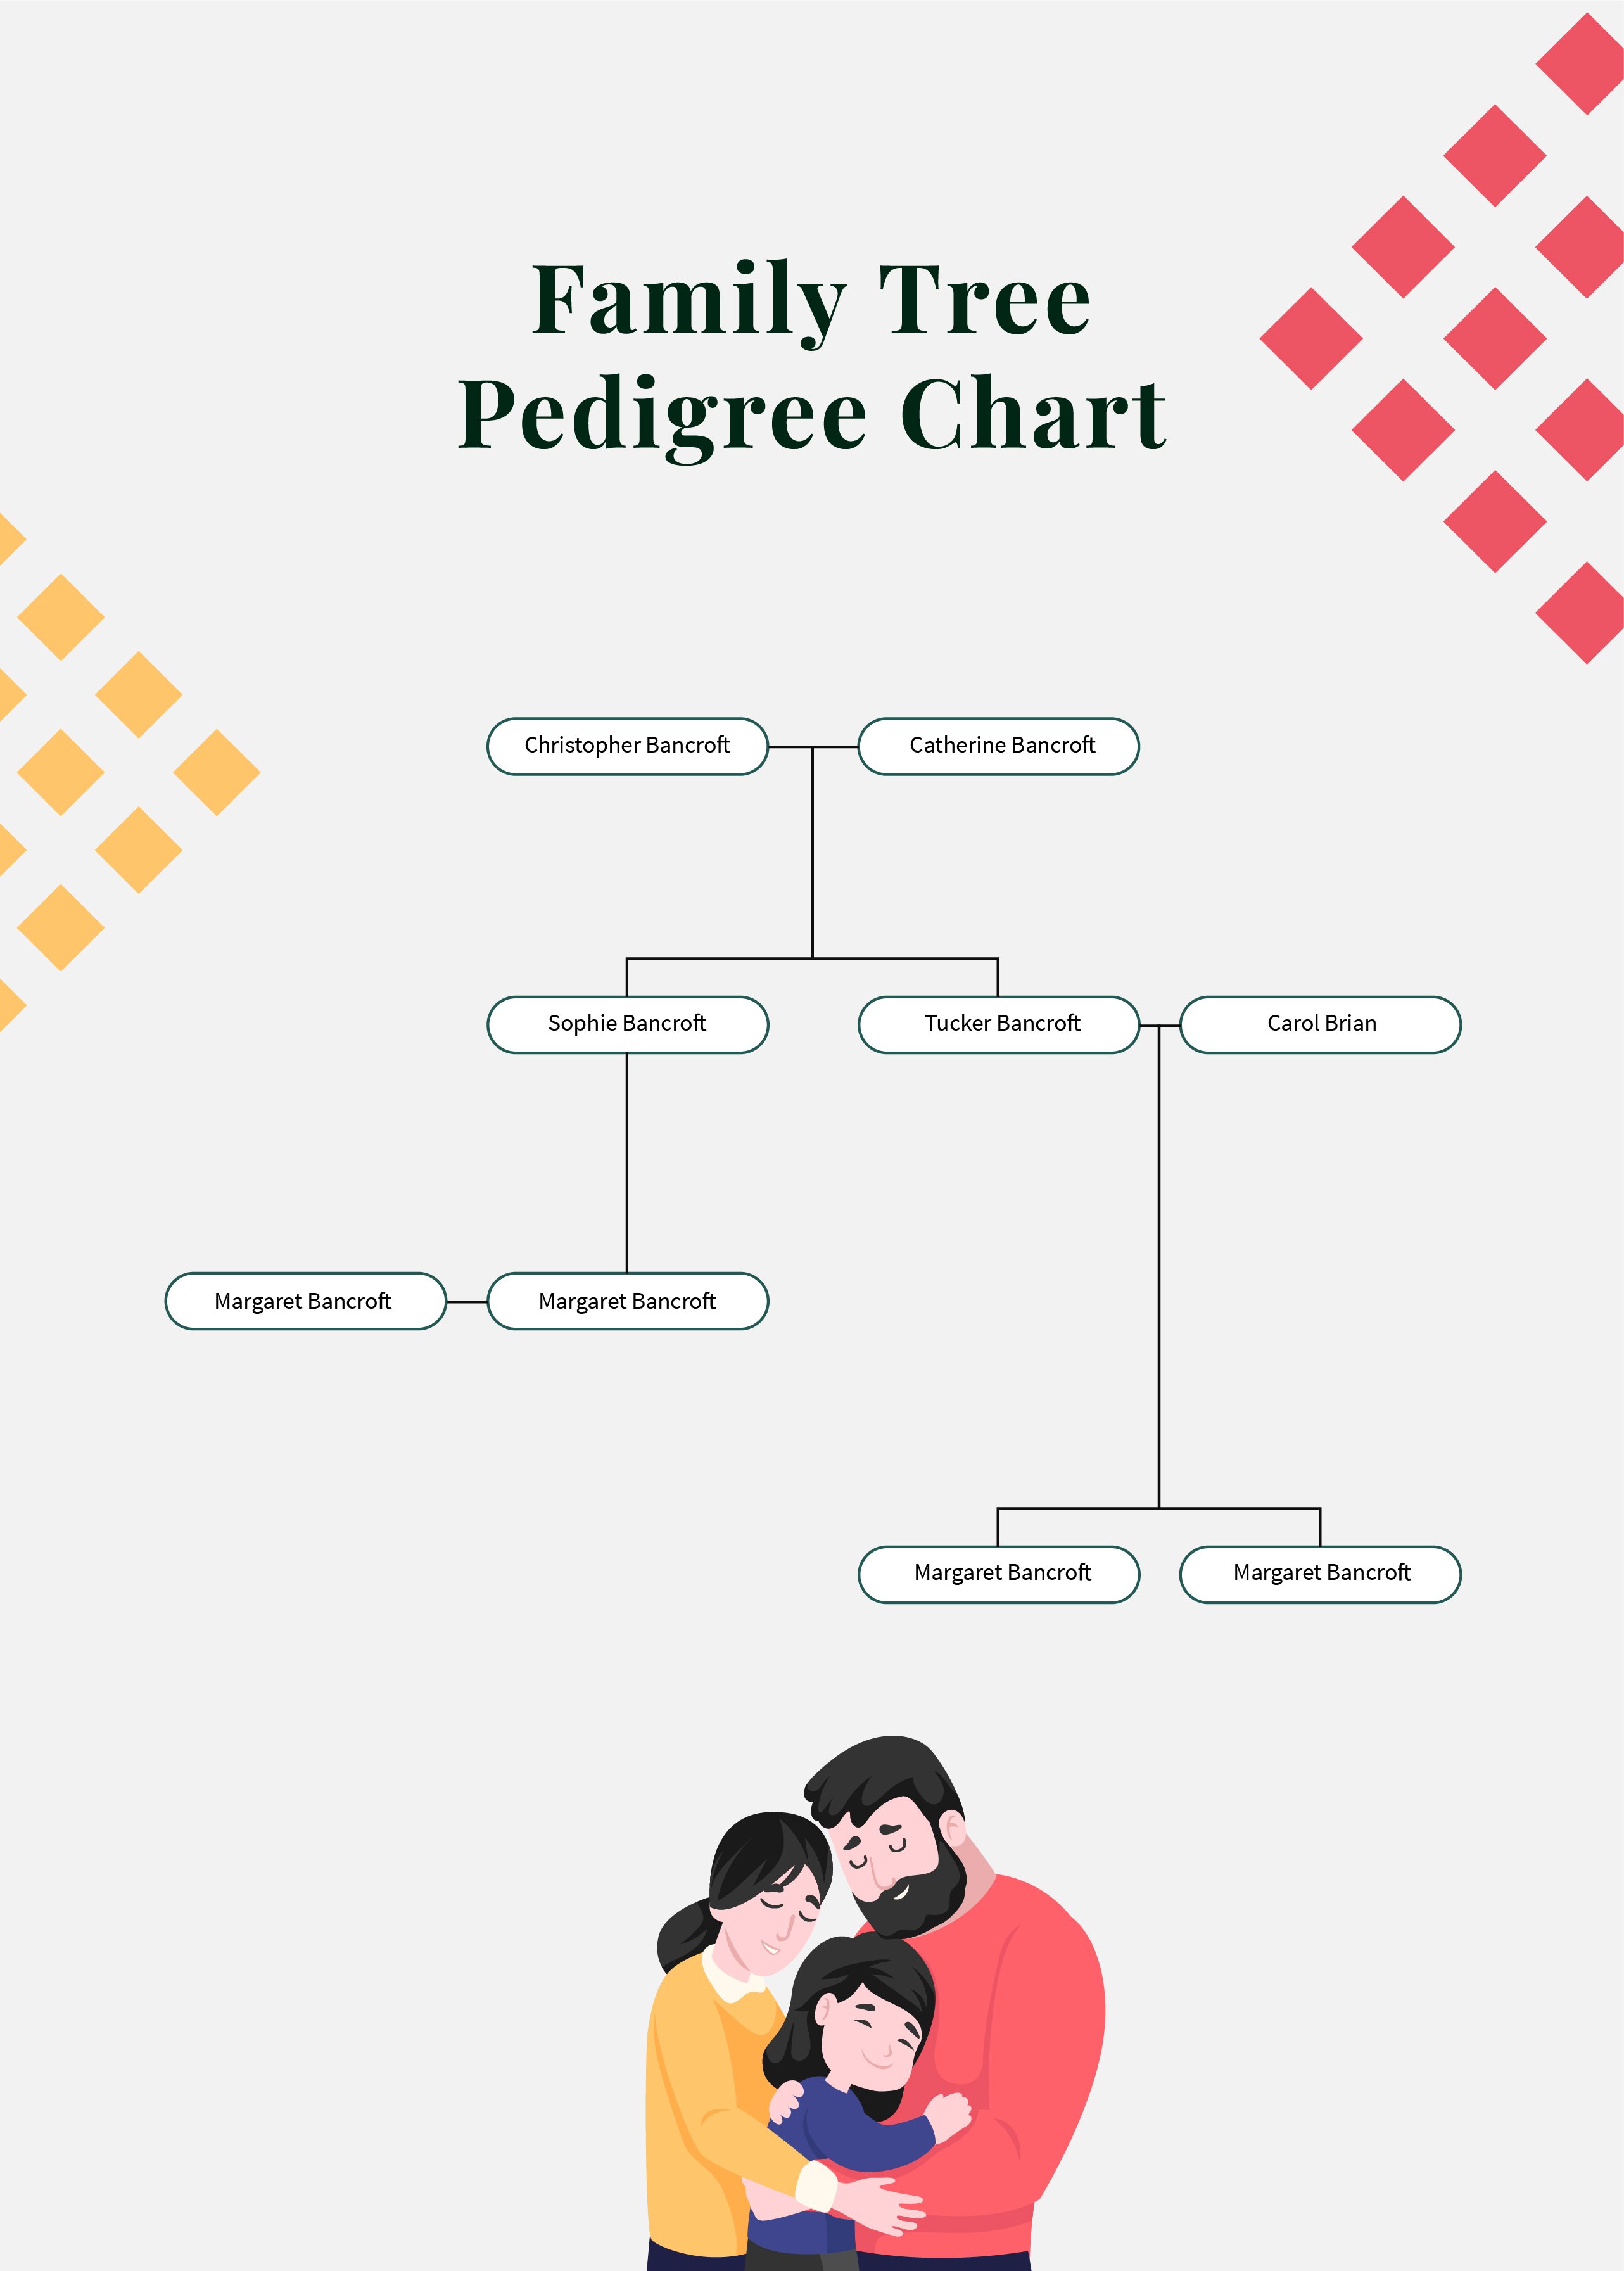 How to fill out pedigree chart  Pedigree chart, Family tree chart